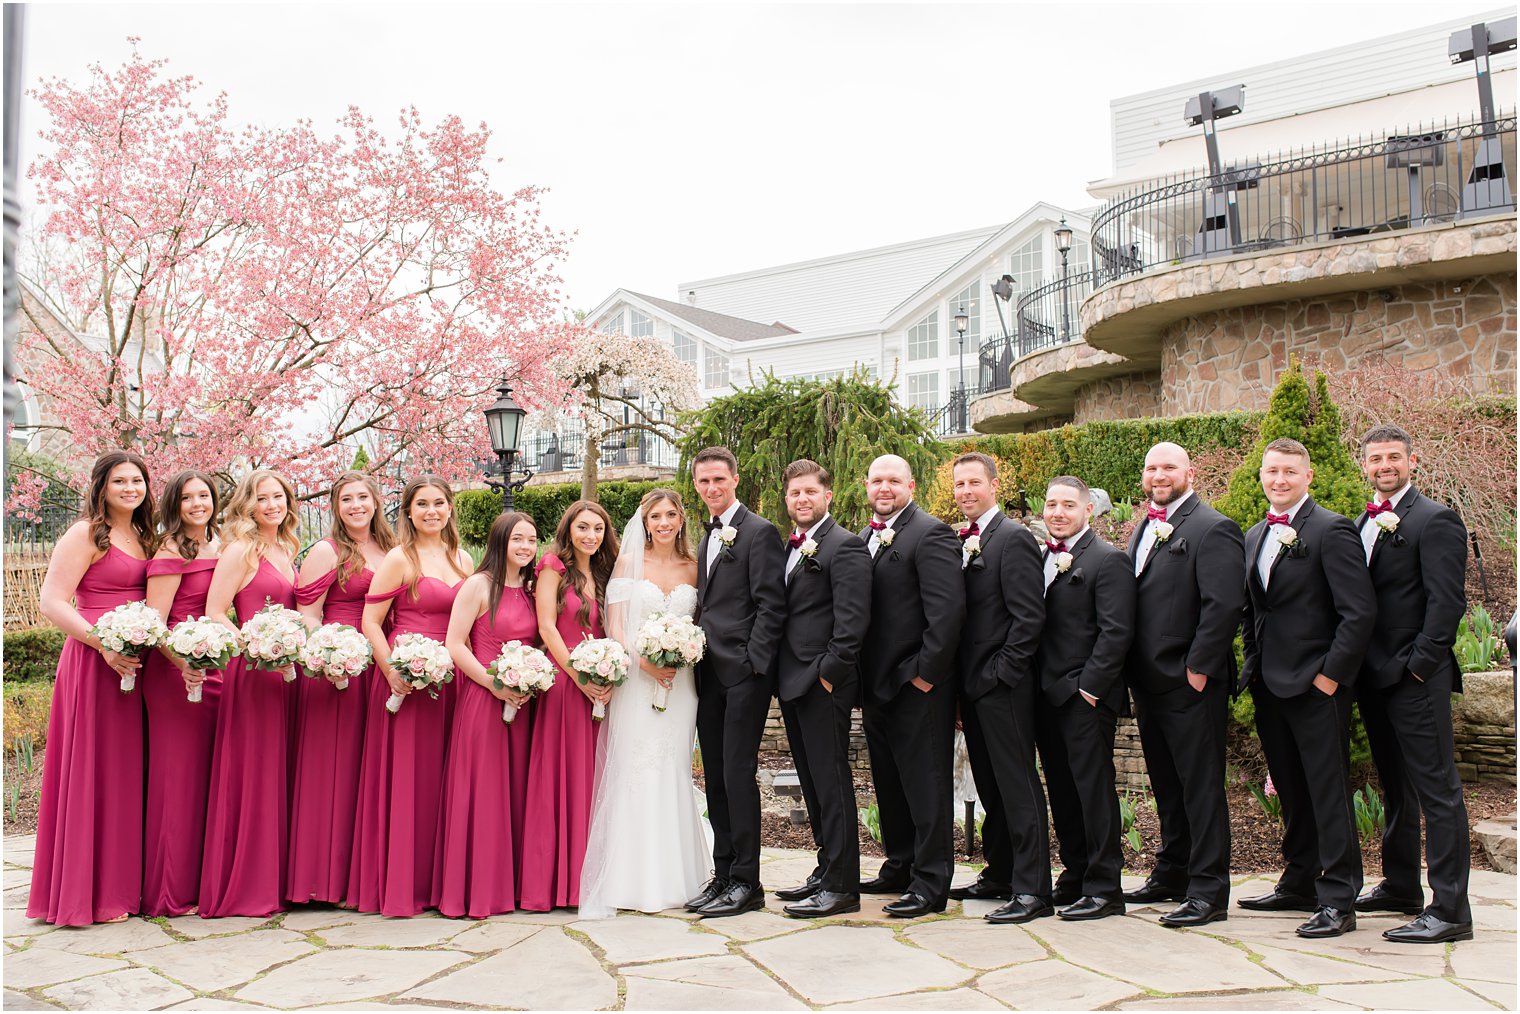 bride and groom pose with bridesmaids in cranberry and groomsmen in black suits 